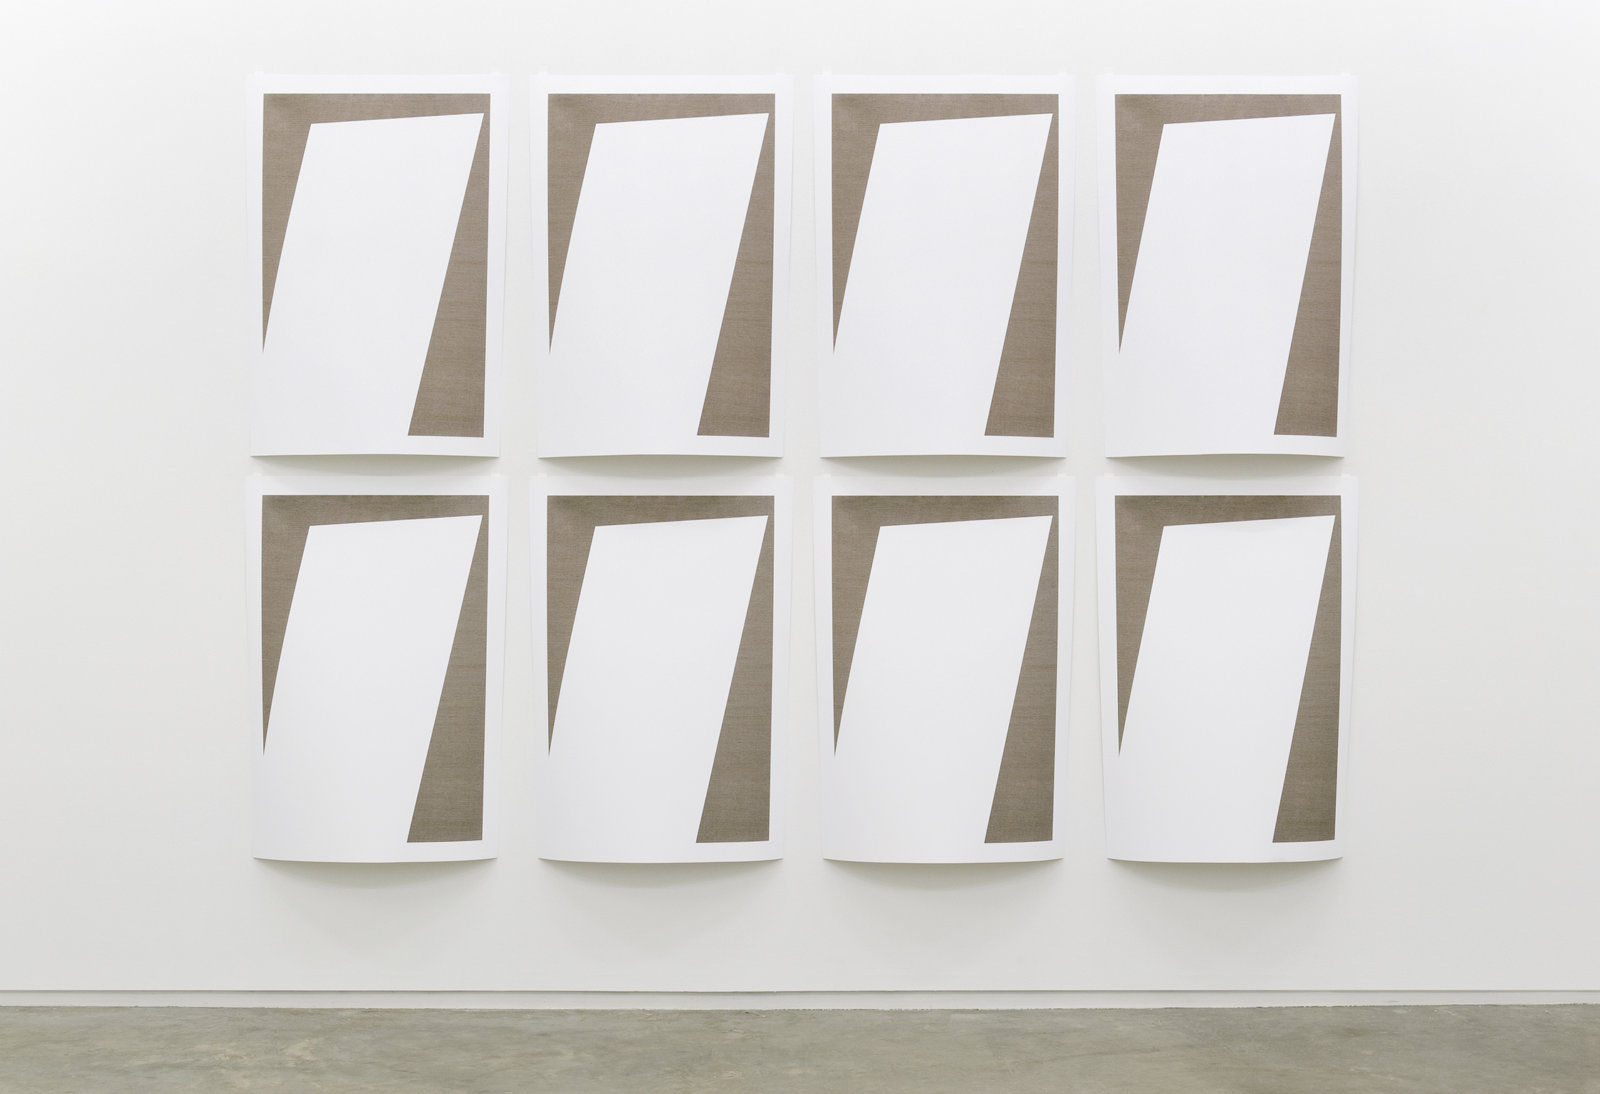 ​Arabella Campbell, Studies for an incomplete work, 2011, 8 LightJet prints on paper, 82 x 118 in. (208 x 300 cm by 